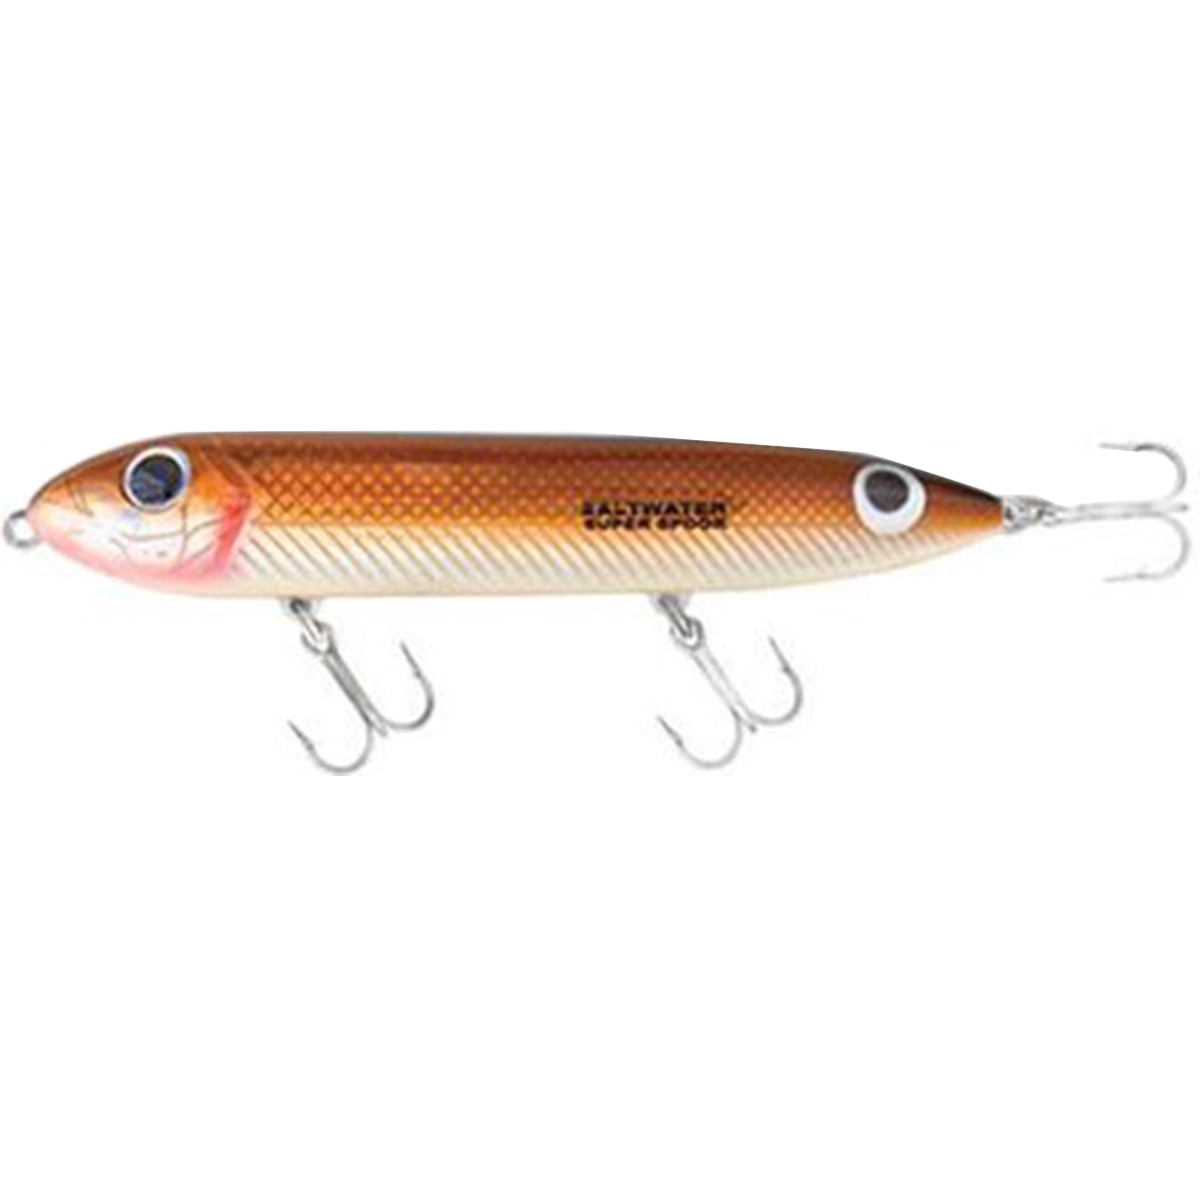 Super Jr Heddon Super Spook Topwater Fishing Lure for Saltwater and Freshwater